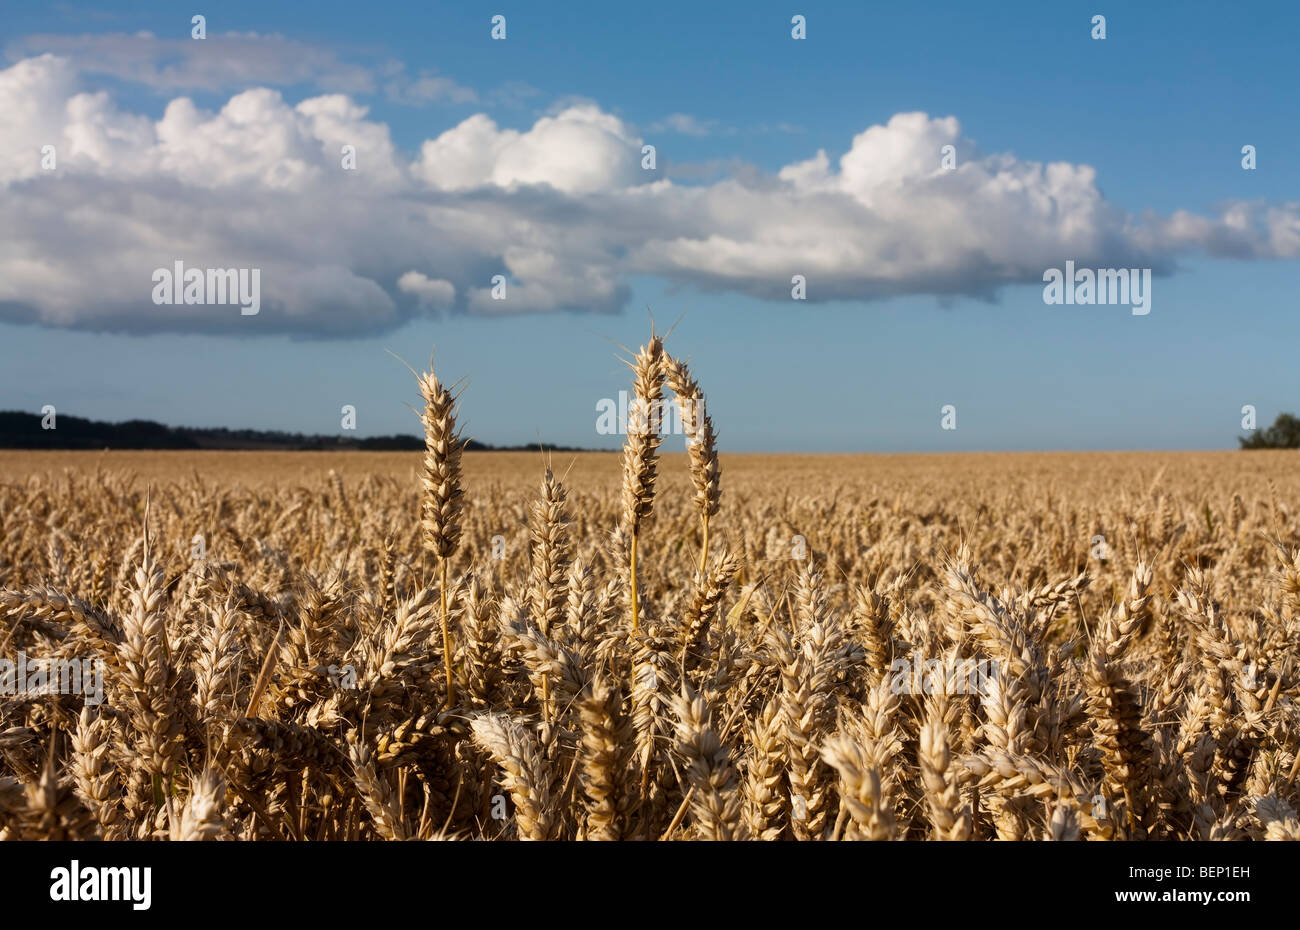 Differential focus from low view point of a few stems of wheat standing head and shoulders above the crowd. Stock Photo